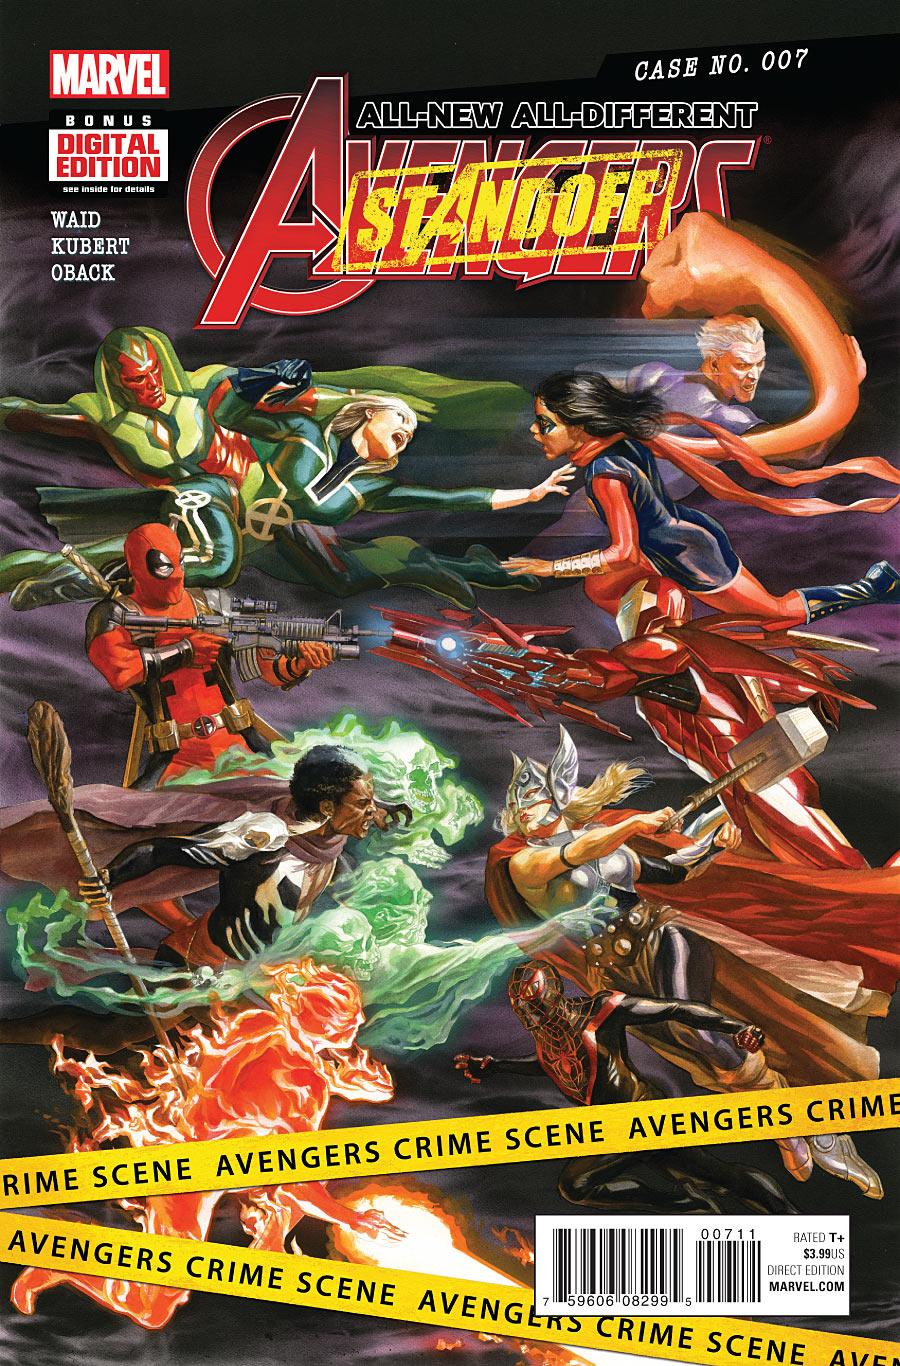 All-New, All-Different Avengers Vol. 1 #7